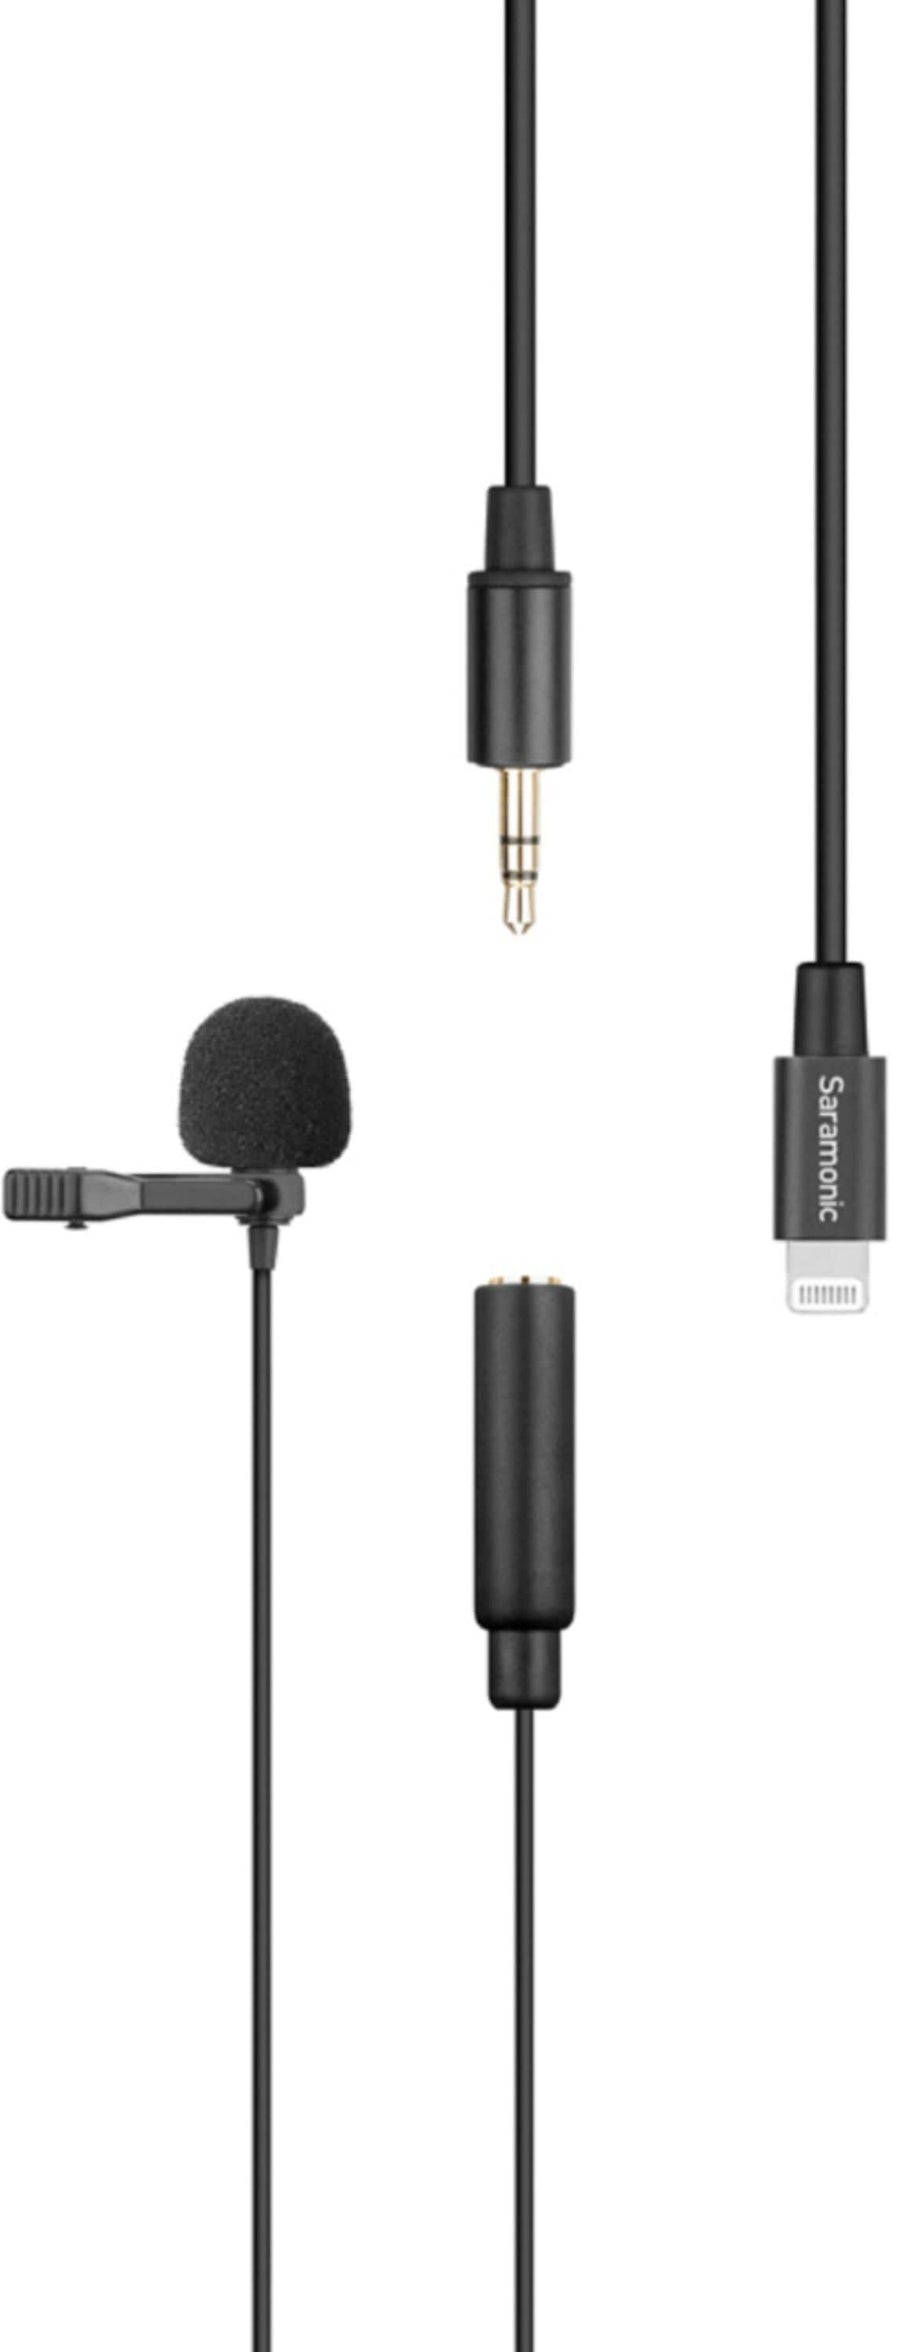 Saramonic - Lavalier Microphone with Lightning for Apple iPhone, or iPad w/ a Built-in 6.6-foot (2m) Cable (LavMicro U1A)_0